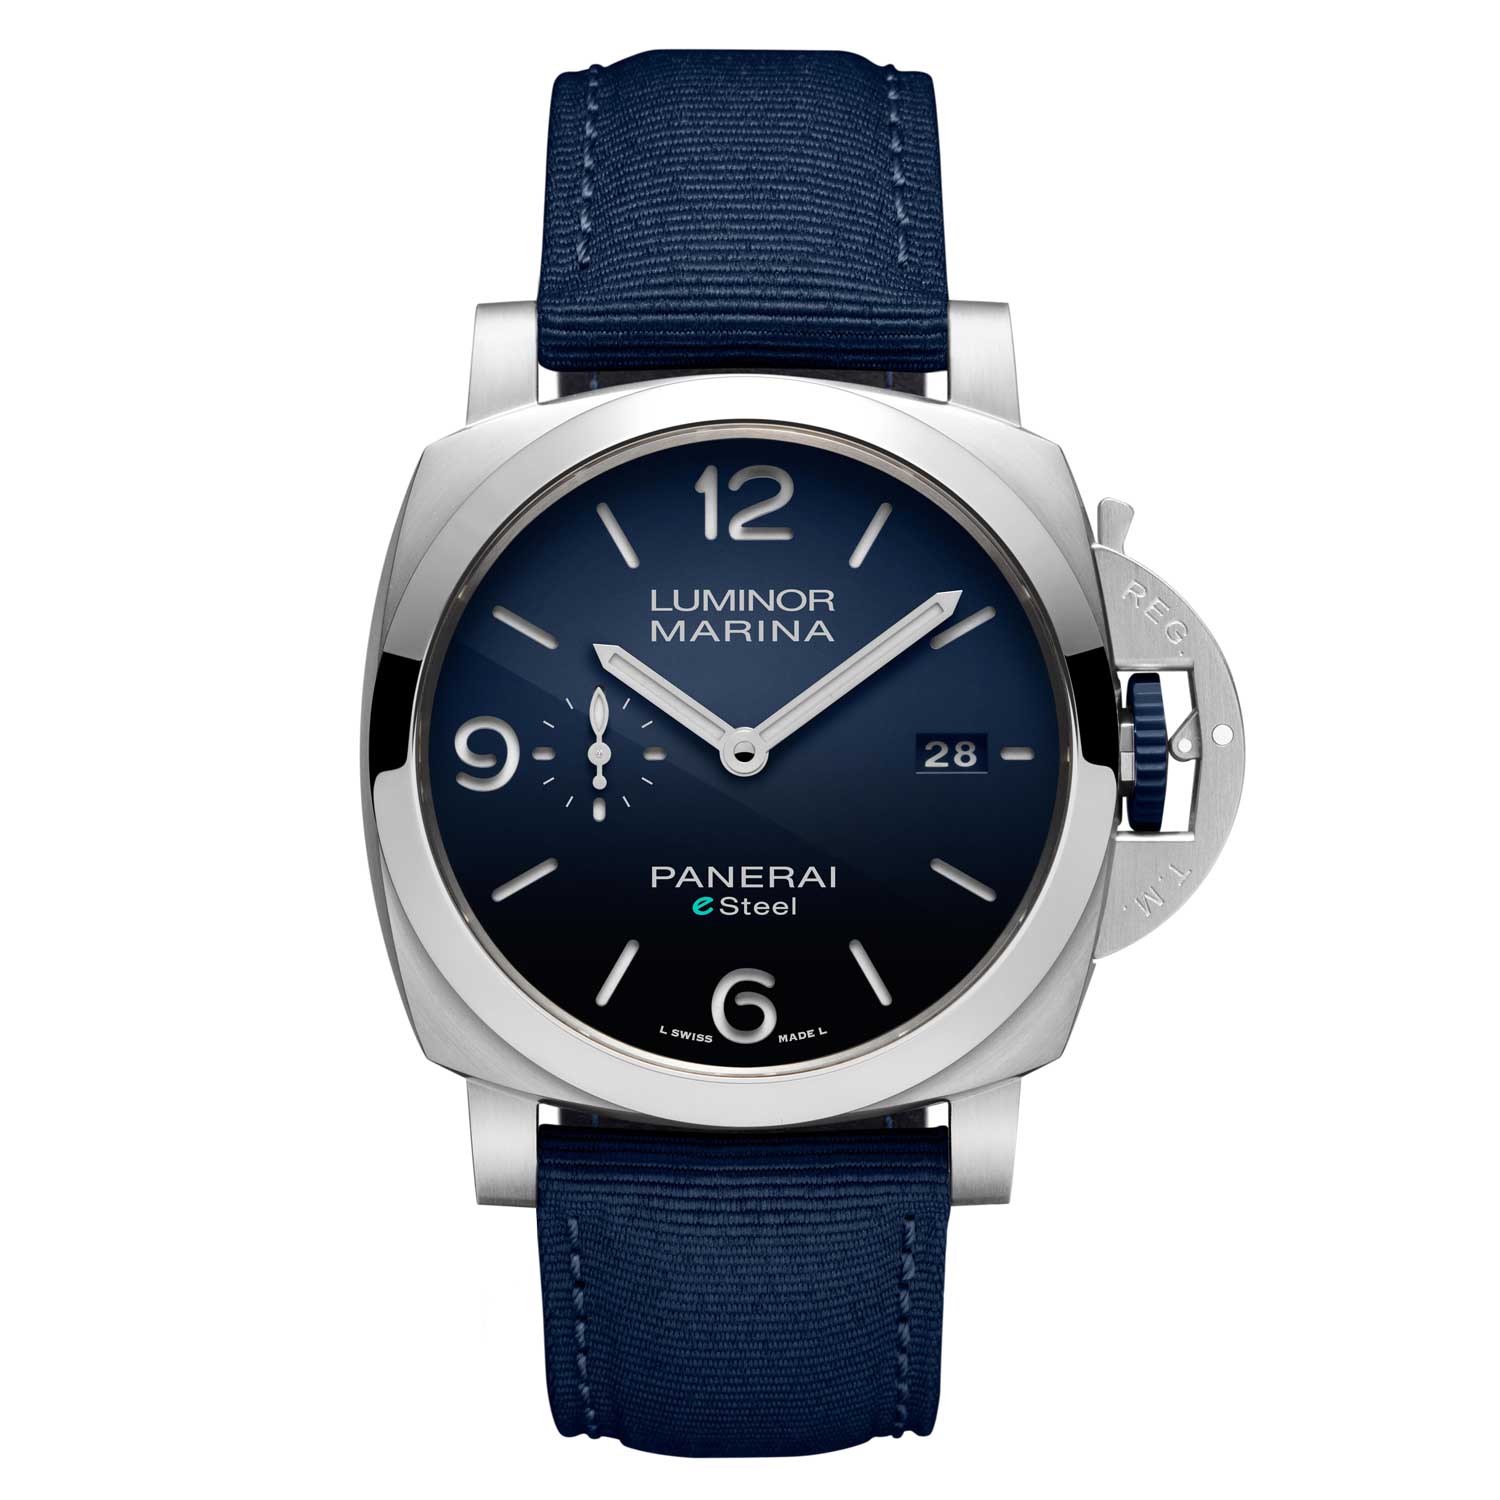 The watch is available in three colors: blue, gray and green — the last being reserved for Panerai’s boutiques and ecommerce.